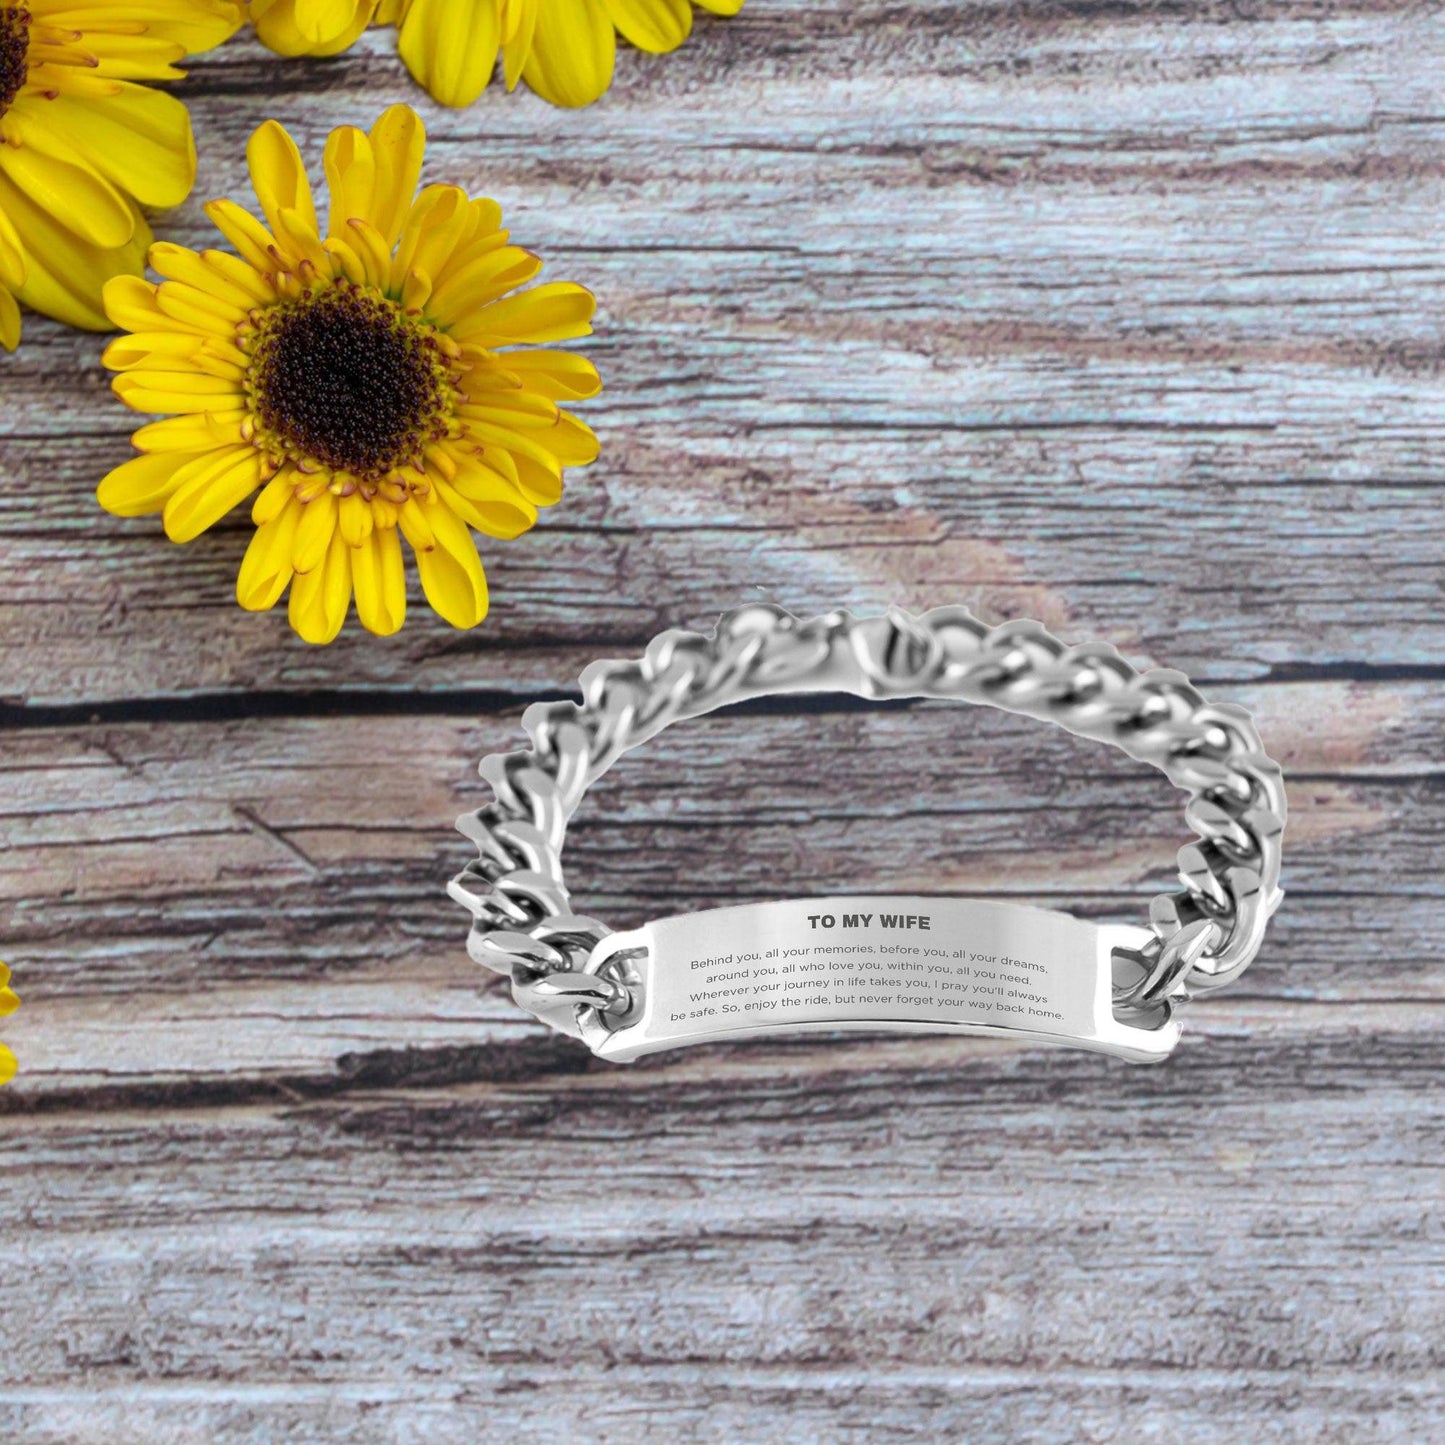 To My Wife Gifts, Inspirational Wife Cuban Chain Stainless Steel Bracelet, Sentimental Birthday Christmas Unique Gifts For Wife Behind you, all your memories, before you, all your dreams, around you, all who love you, within you, all you need - Mallard Moon Gift Shop